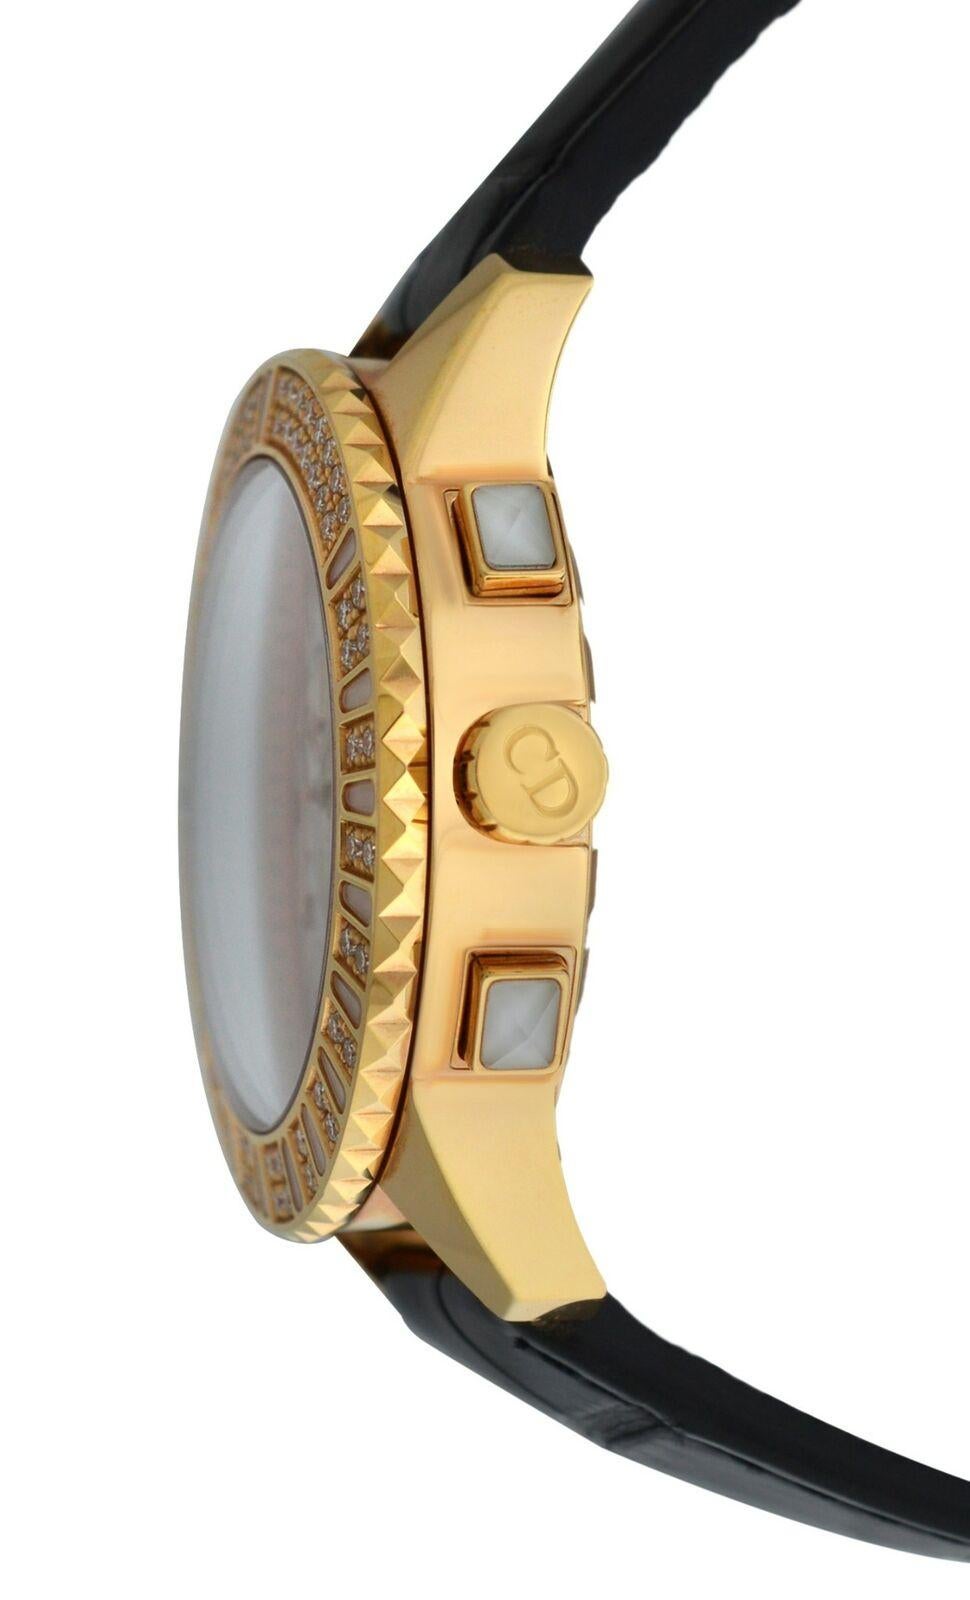 
Brand	Christian Dior
Model	Christal CD114370
Gender	Ladies
Condition	New store display
Movement	Swiss Quartz
Case Material	18K Gold and diamonds
Bracelet / Strap Material	
Genuine Alligator / Crocodile skin
This Christal model has a stunning